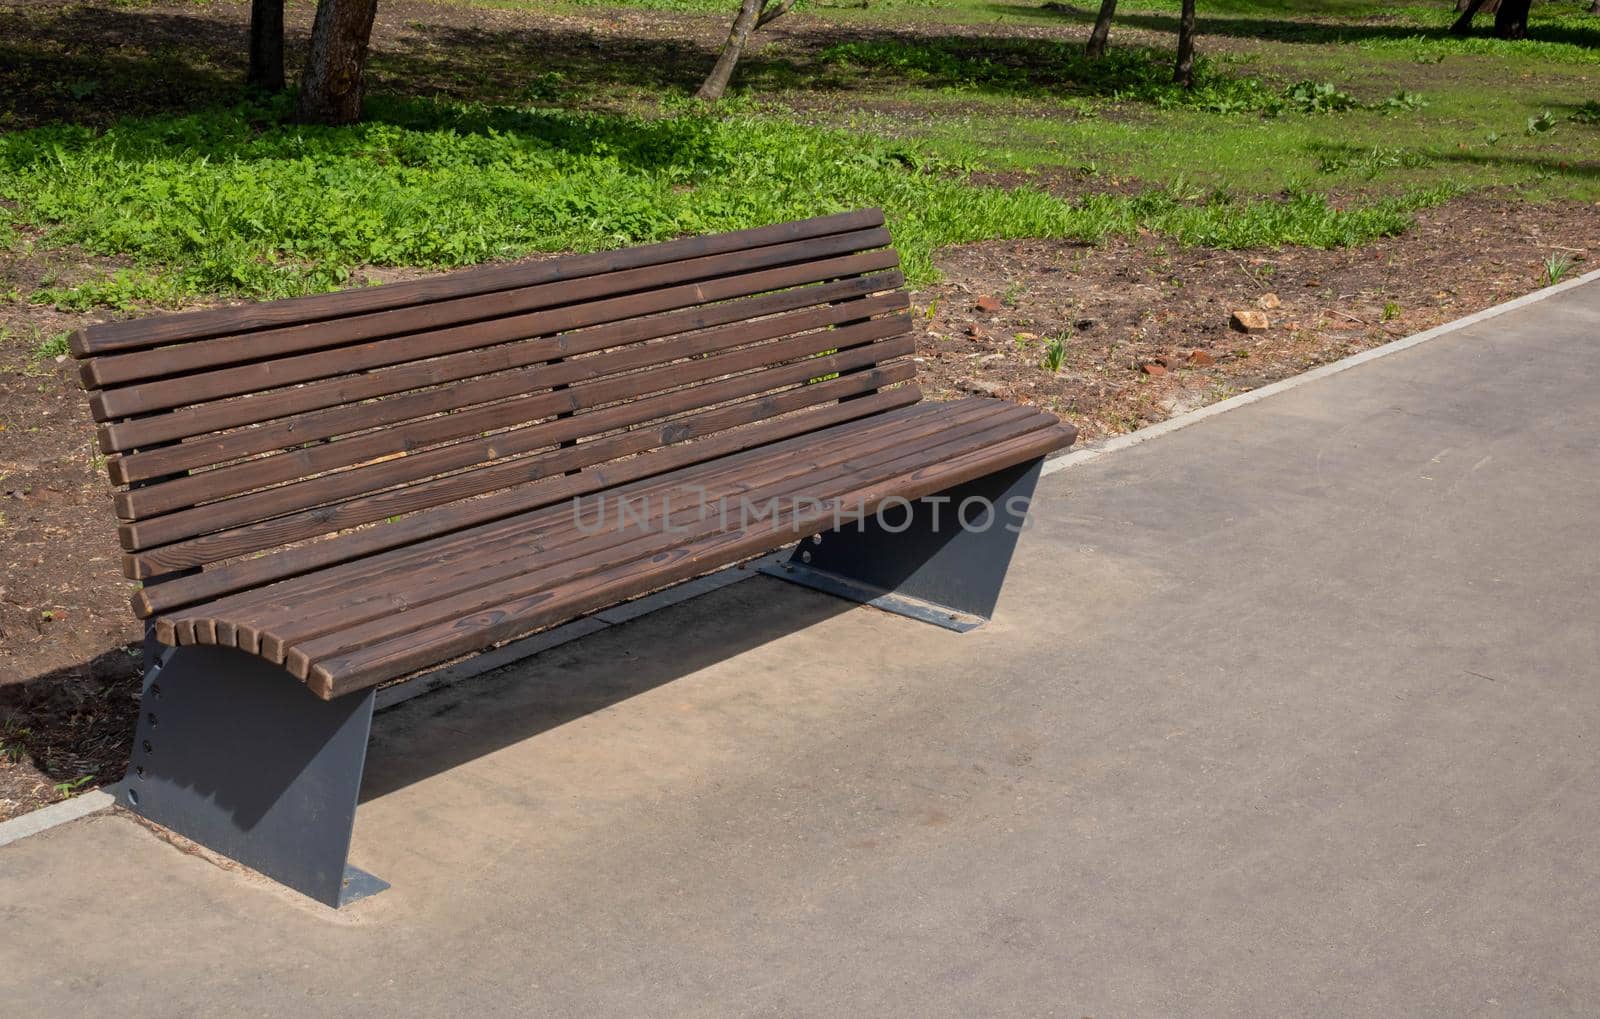 Wooden brown bench in the city park on a bright spring day by lapushka62